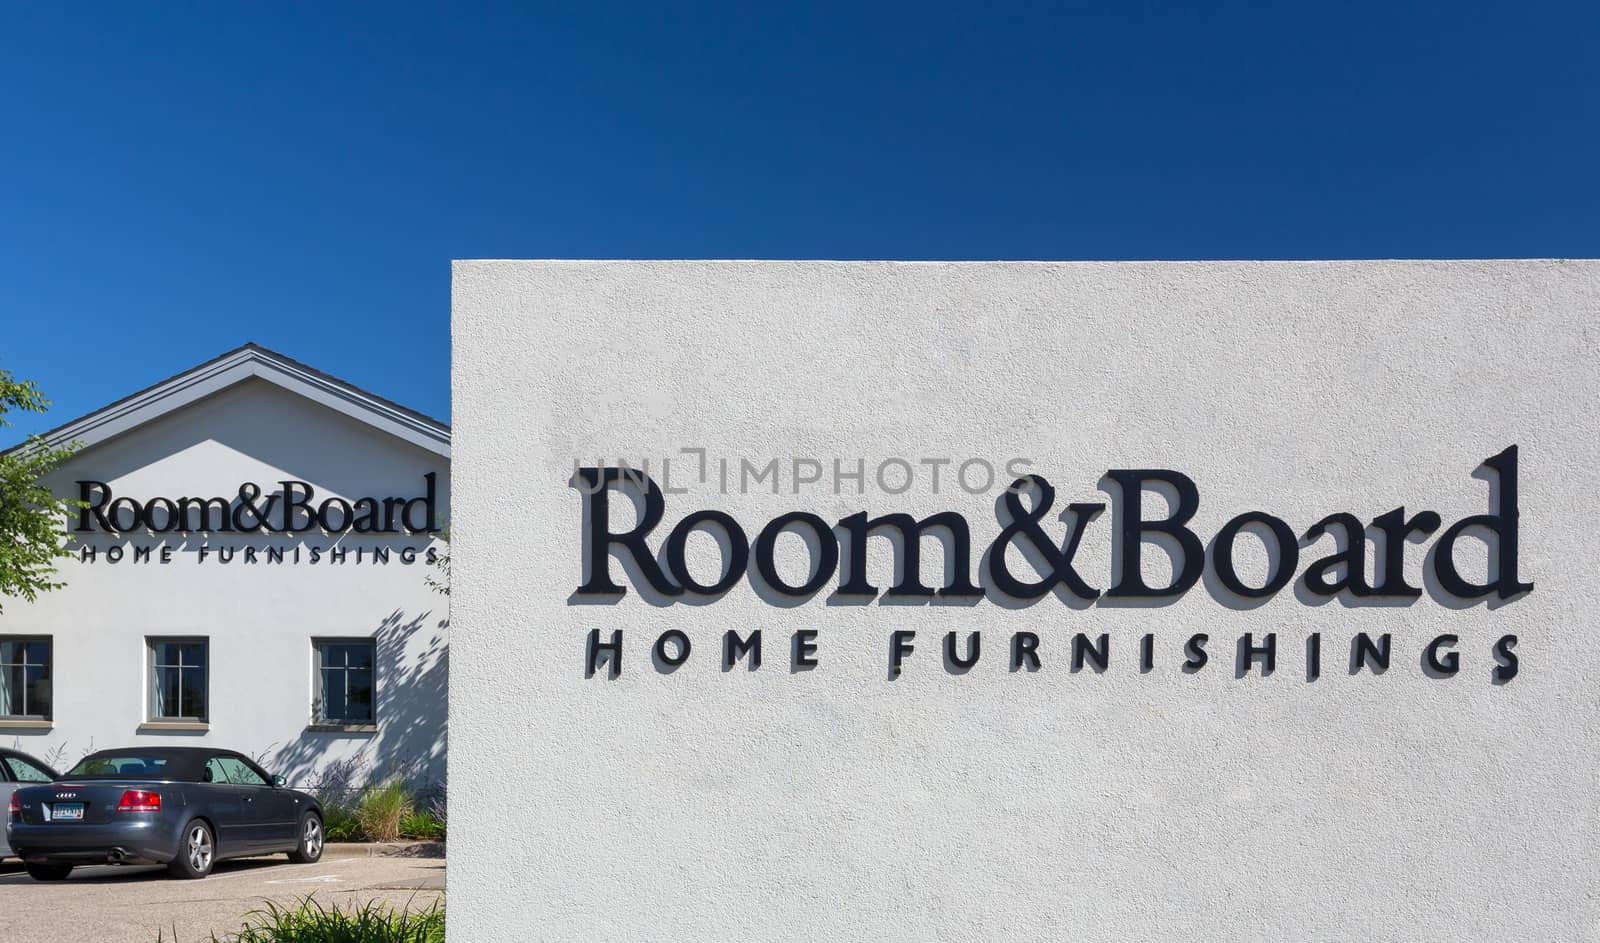 EDINA, MN/USA - AUGUST 11, 2015: Room and Board exterior and sign. Room & Board is an American modern furniture and home furnishings retailer.